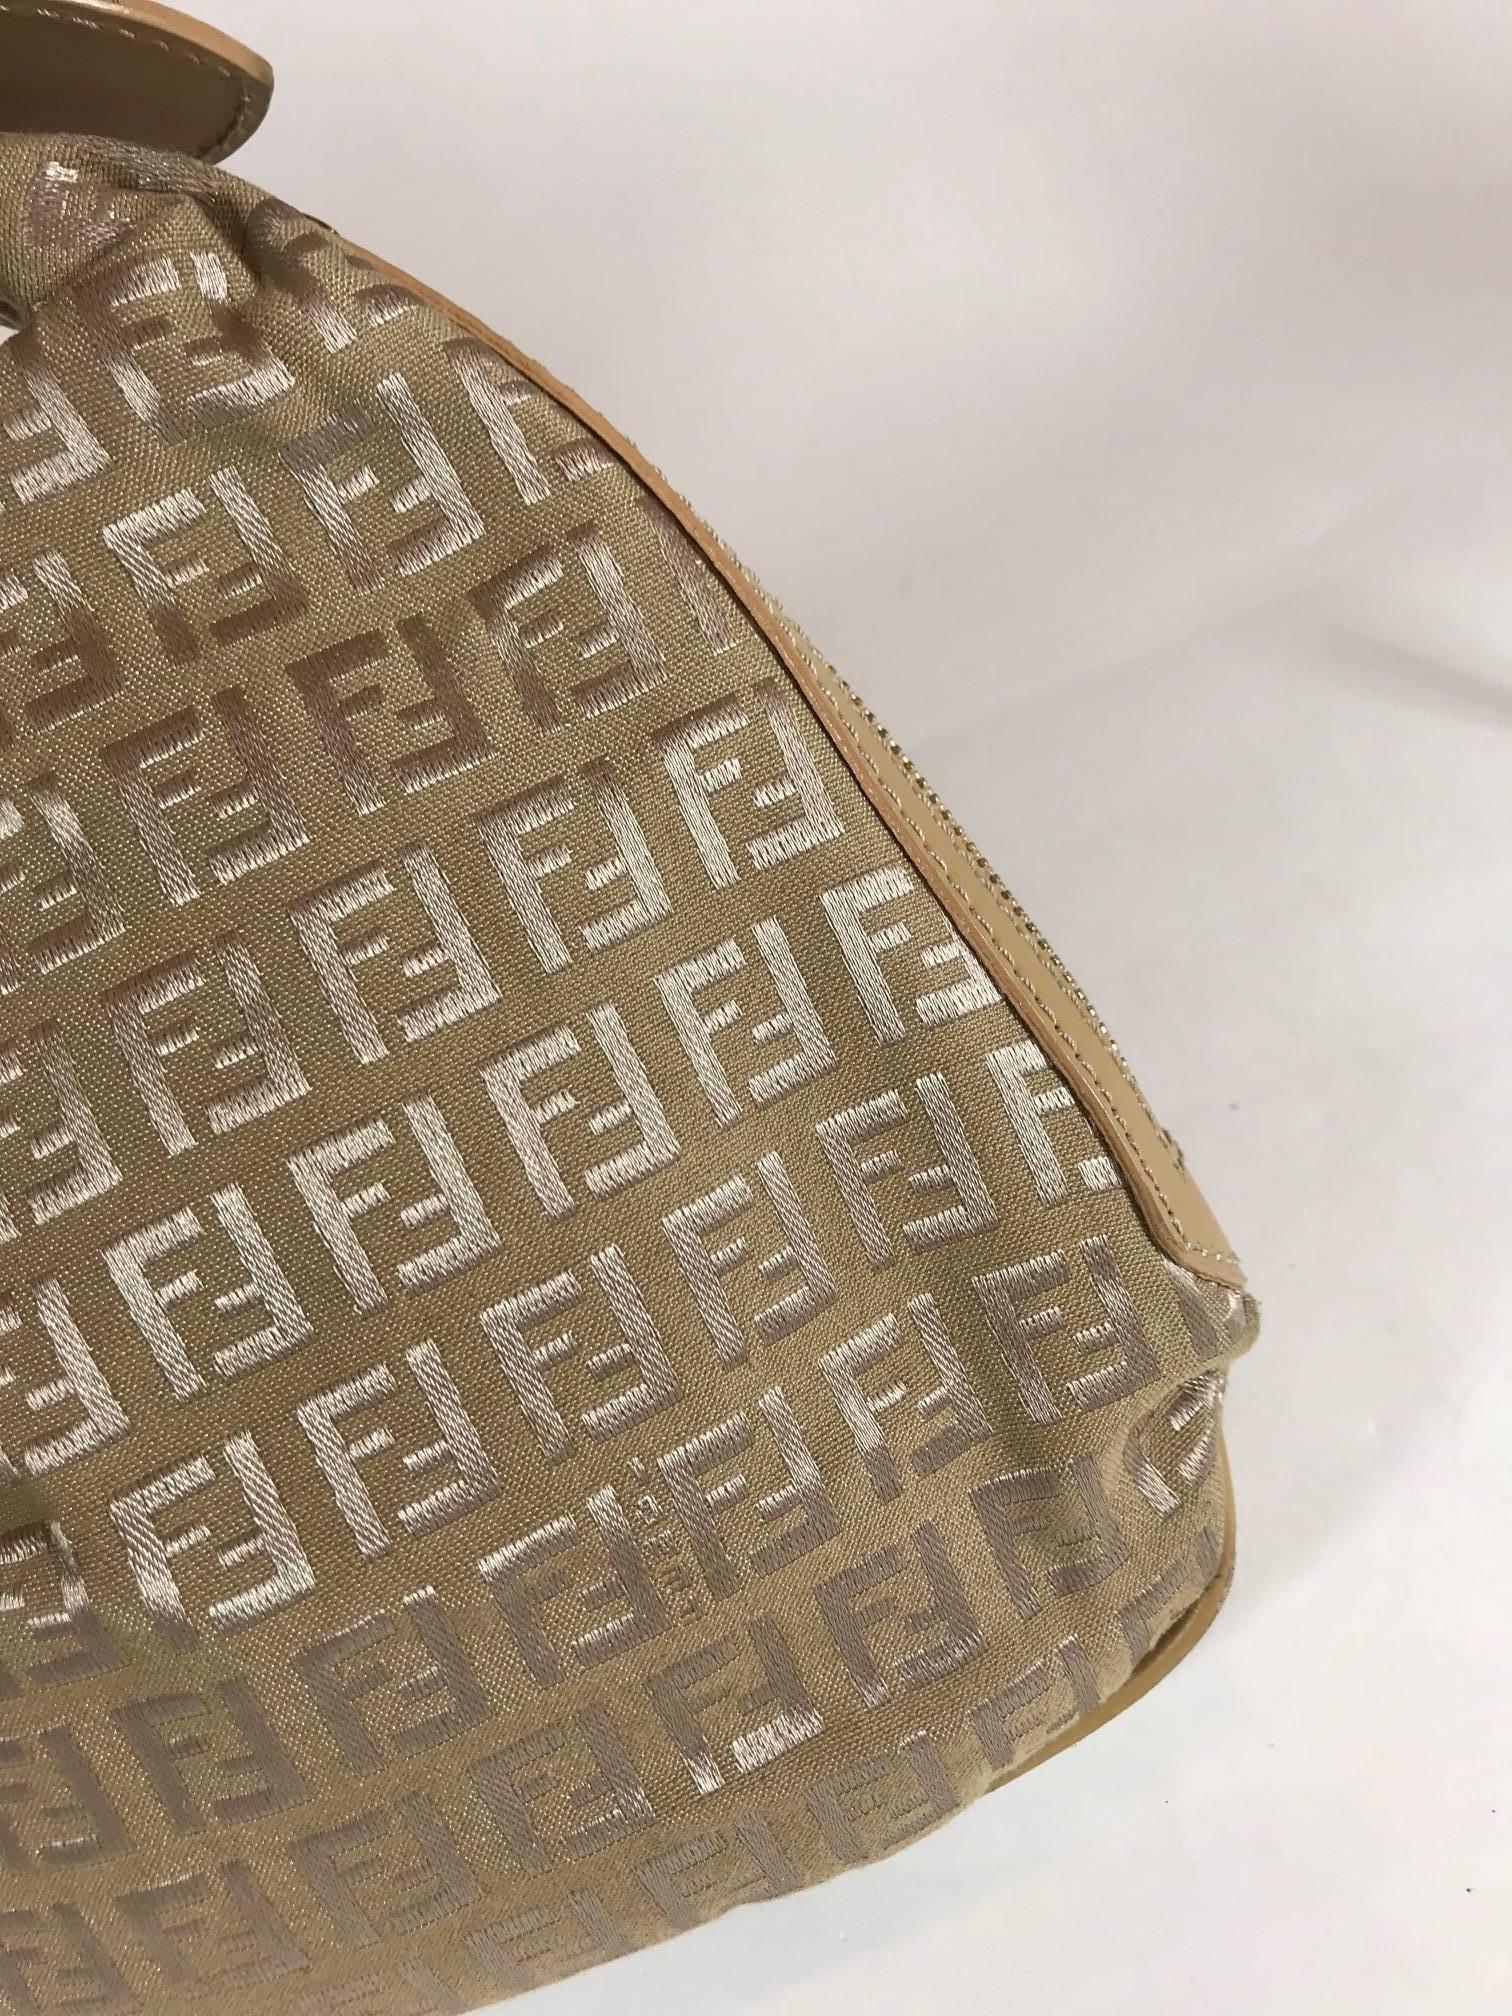 Fendi Zucca Oyster Bag In Excellent Condition For Sale In Roslyn, NY